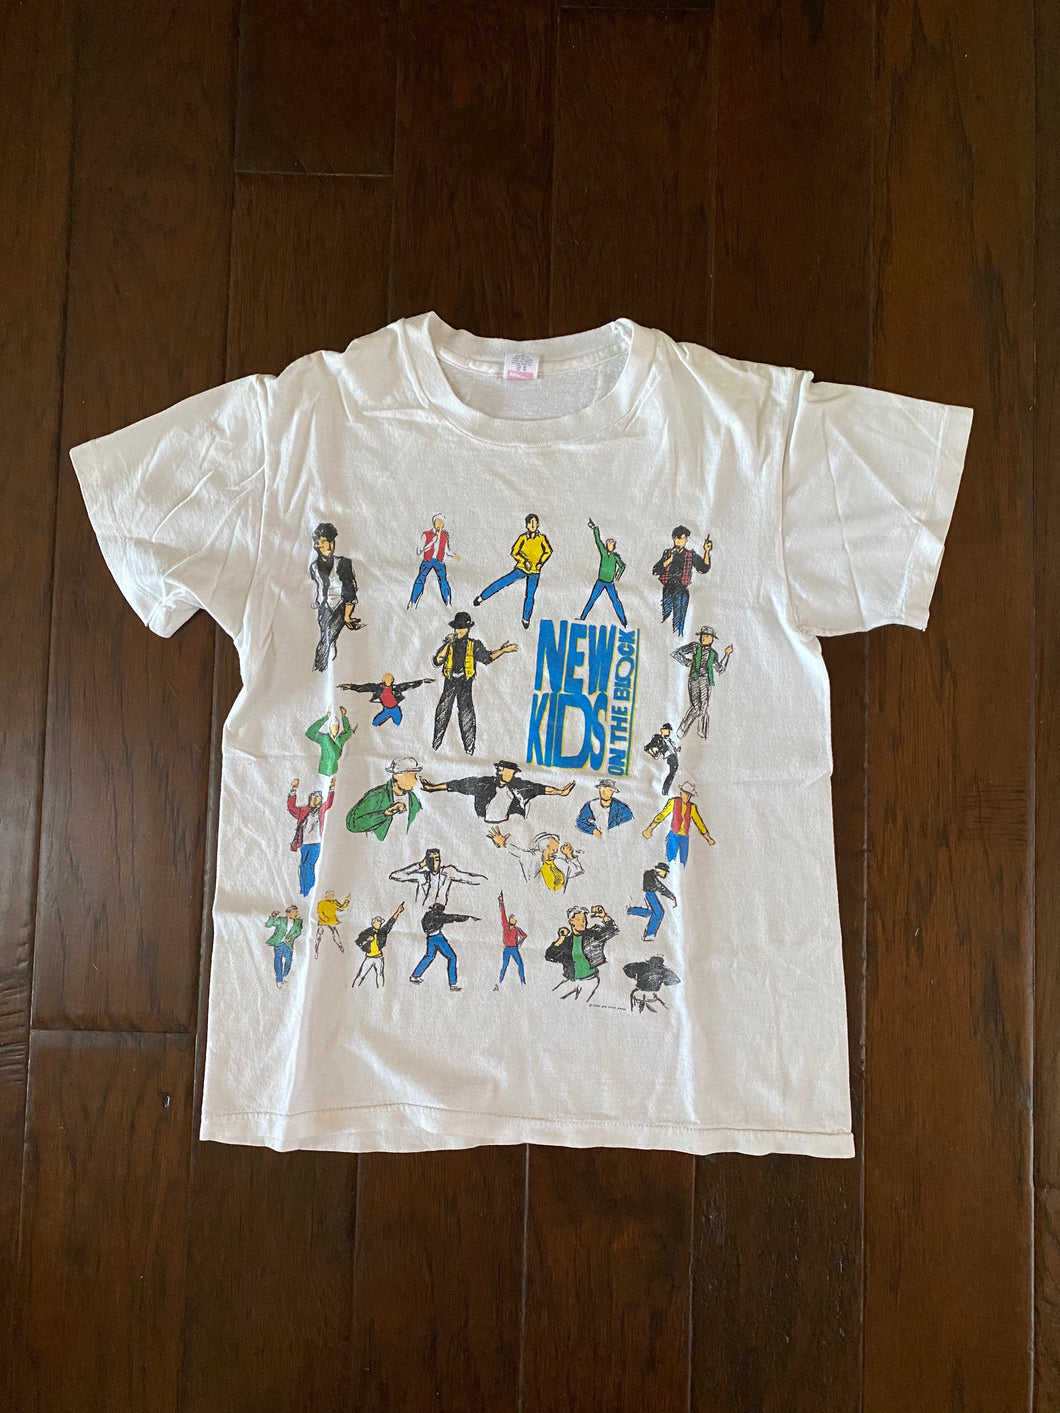 New Kids On The Block 1990 Vintage Distressed T-shirt